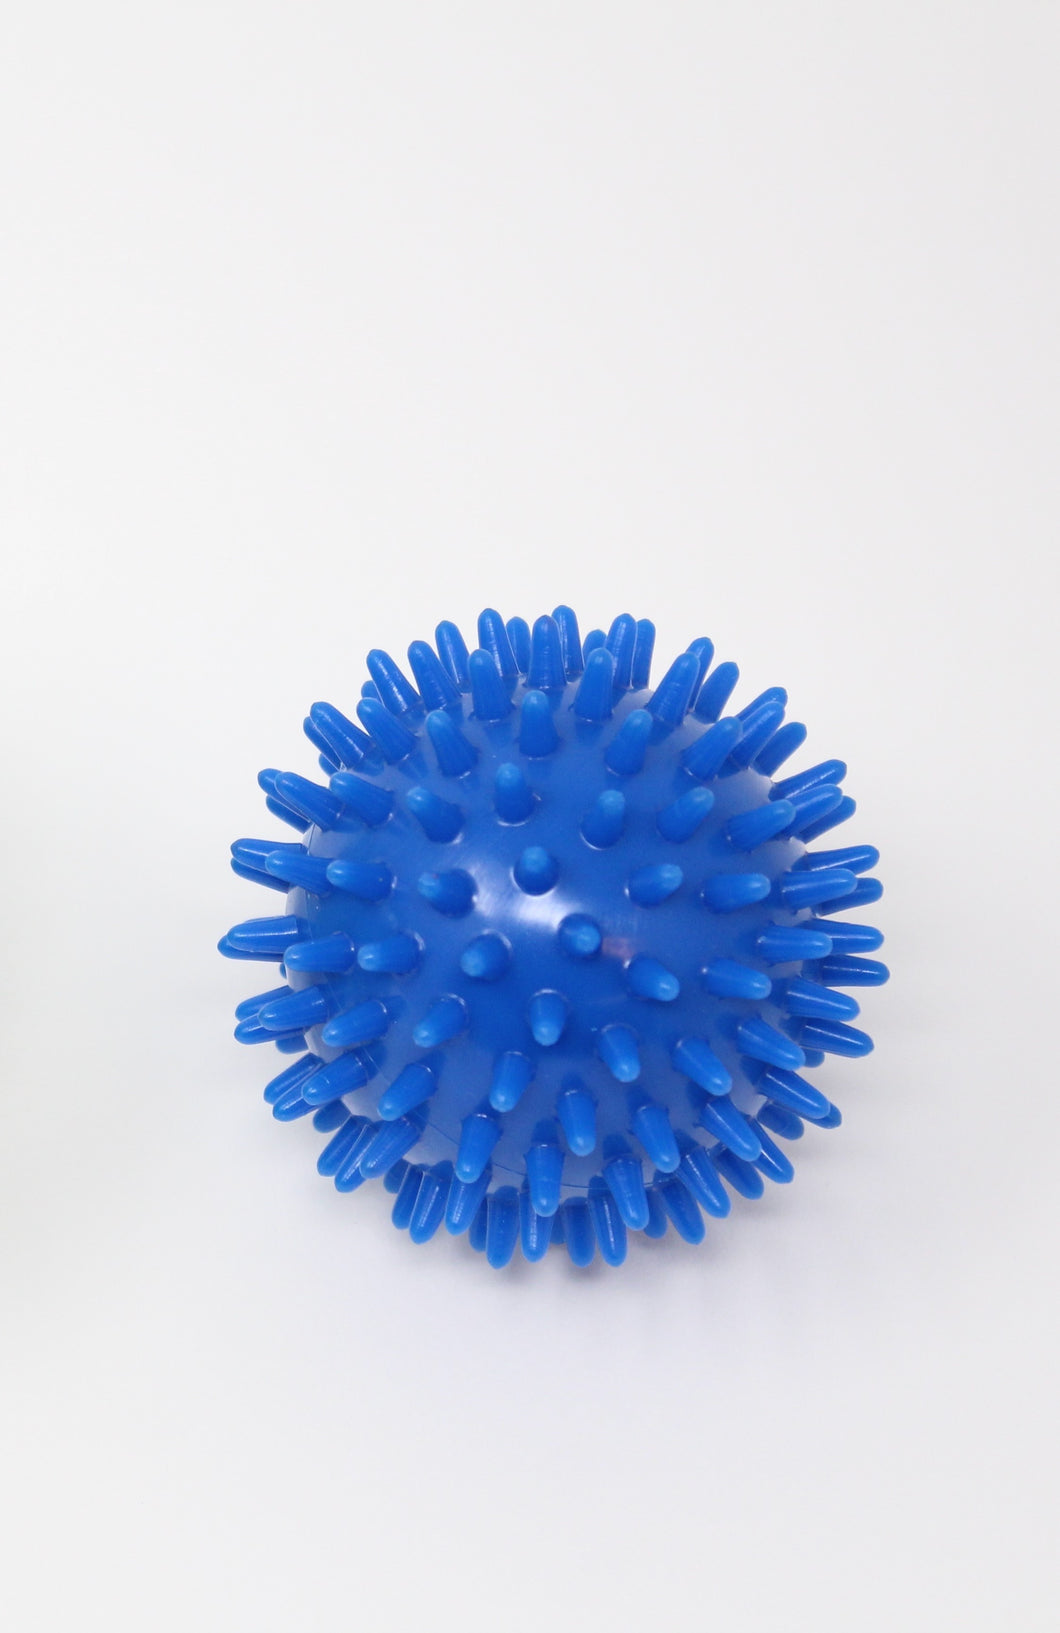 Therapy Massage Spiky Ball